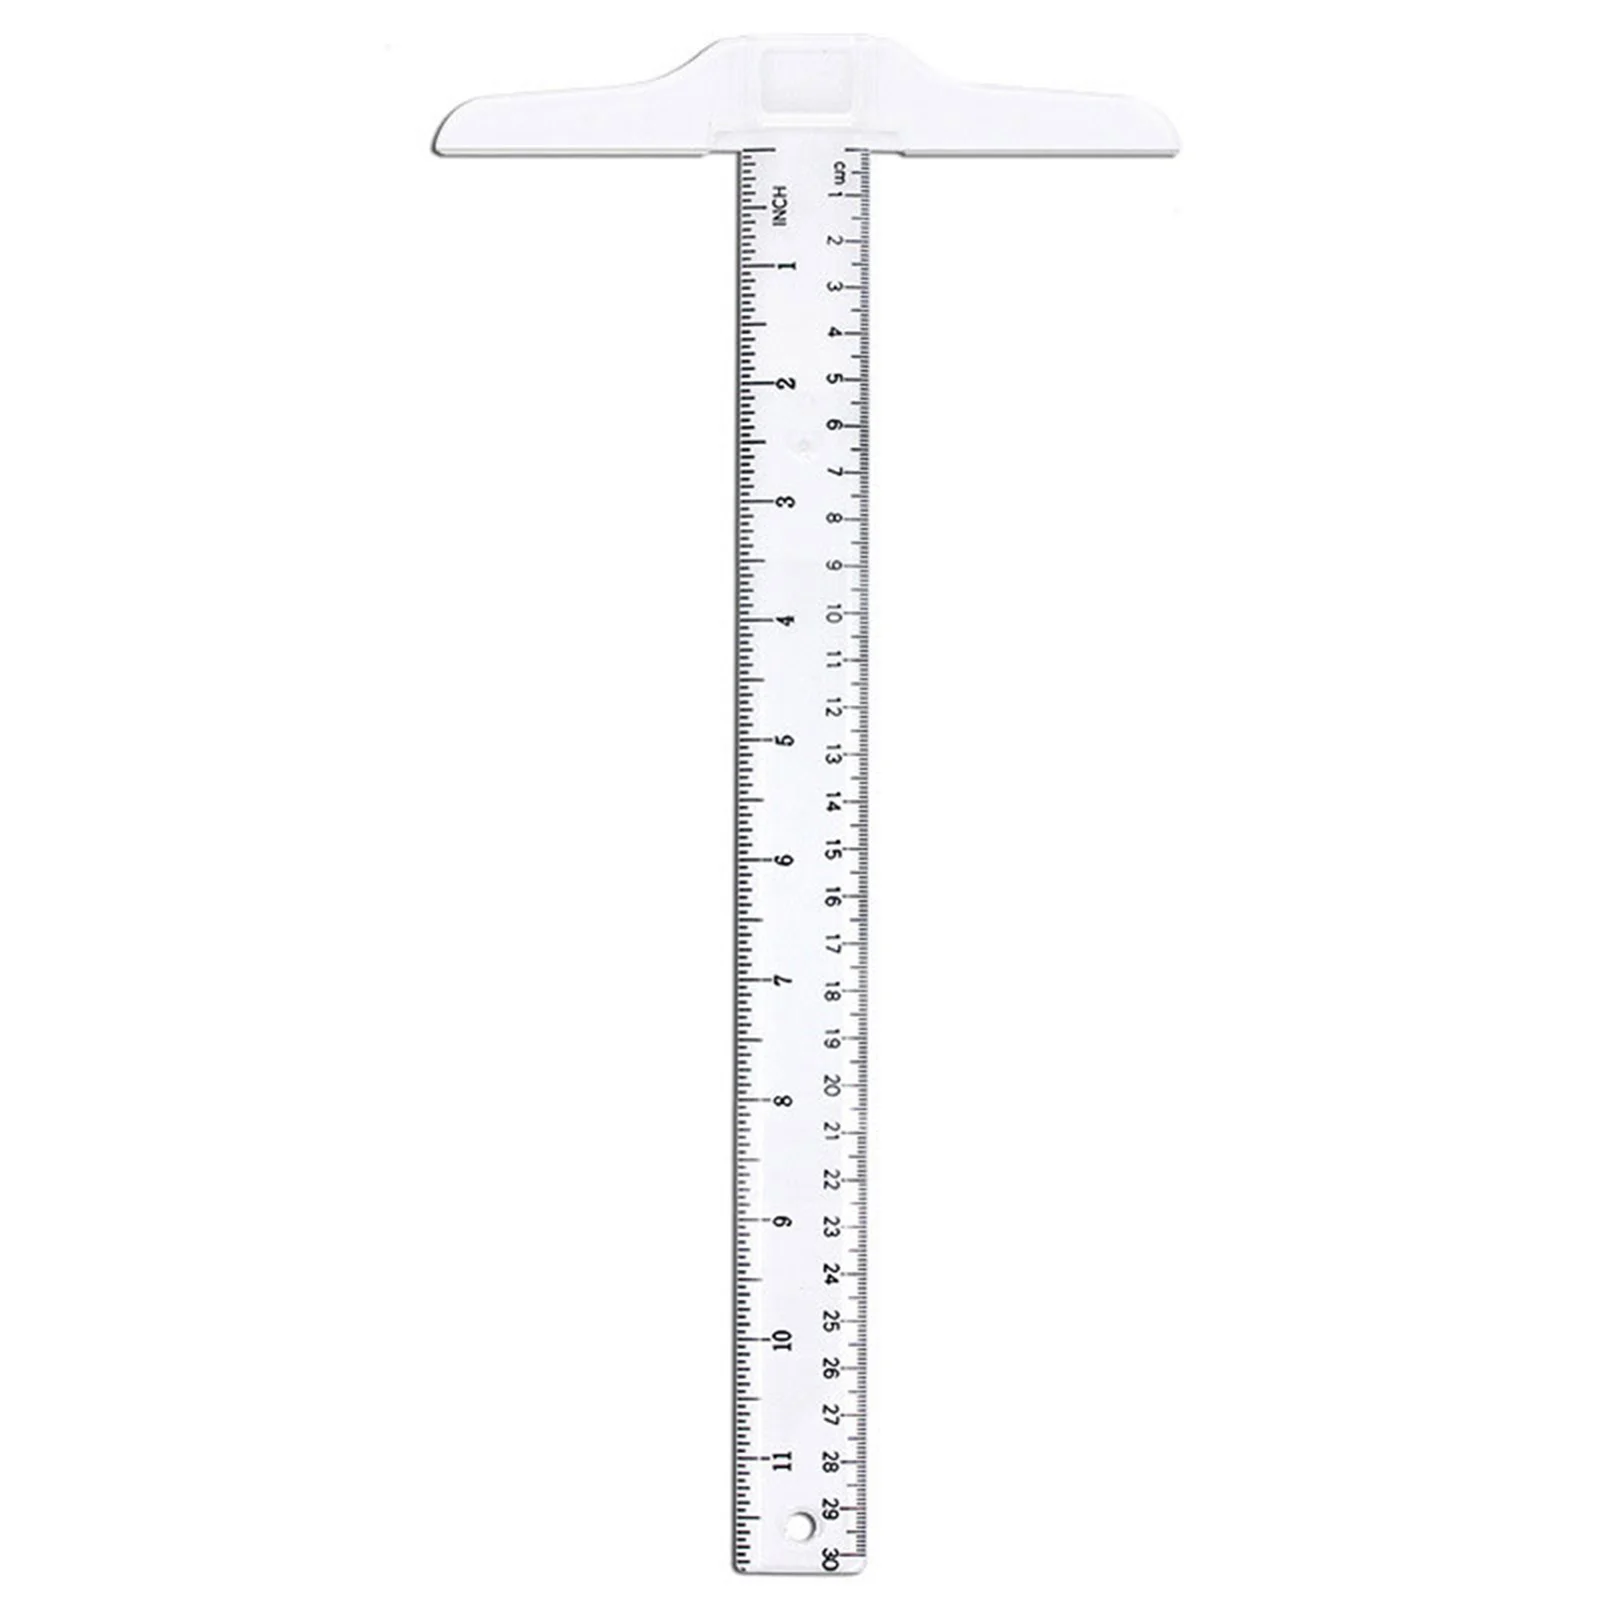 

12Inch/30cm Plastic Transparent T-Ruler Practical Drawing Ruler Drafting Tools for Drafting and General Layout Work IMNT